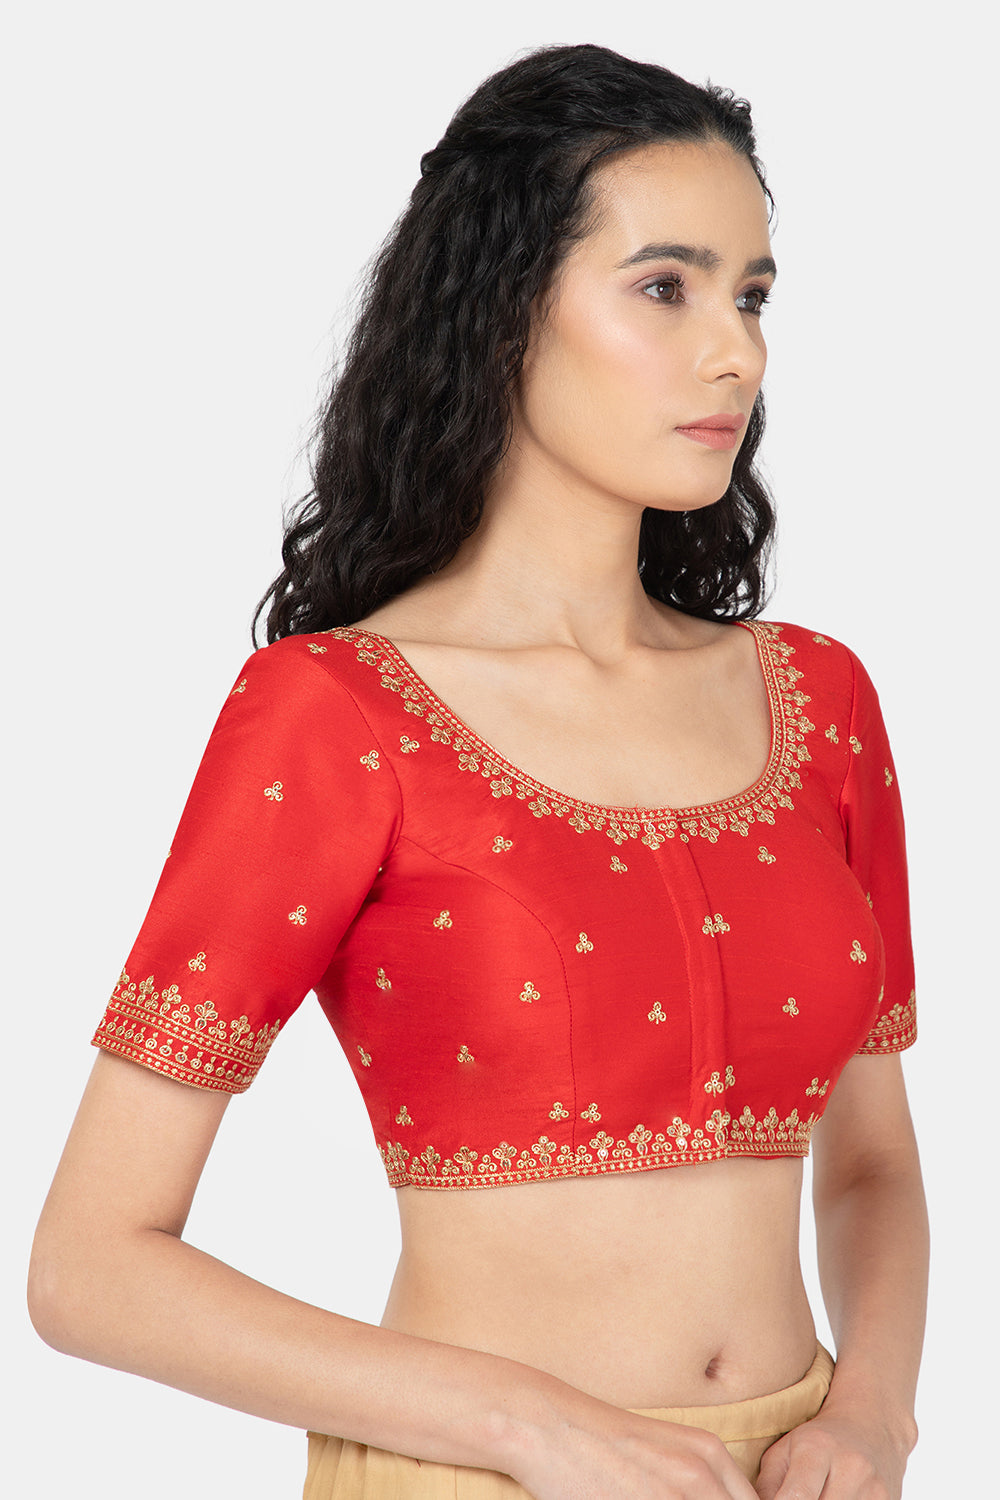 Latest 55 Boat Neck Blouse Designs to Try in 2022 For Sarees and Lehengas -  Tips and Beauty | Blouse neck designs, Boat neck blouse design, Boat neck  blouse